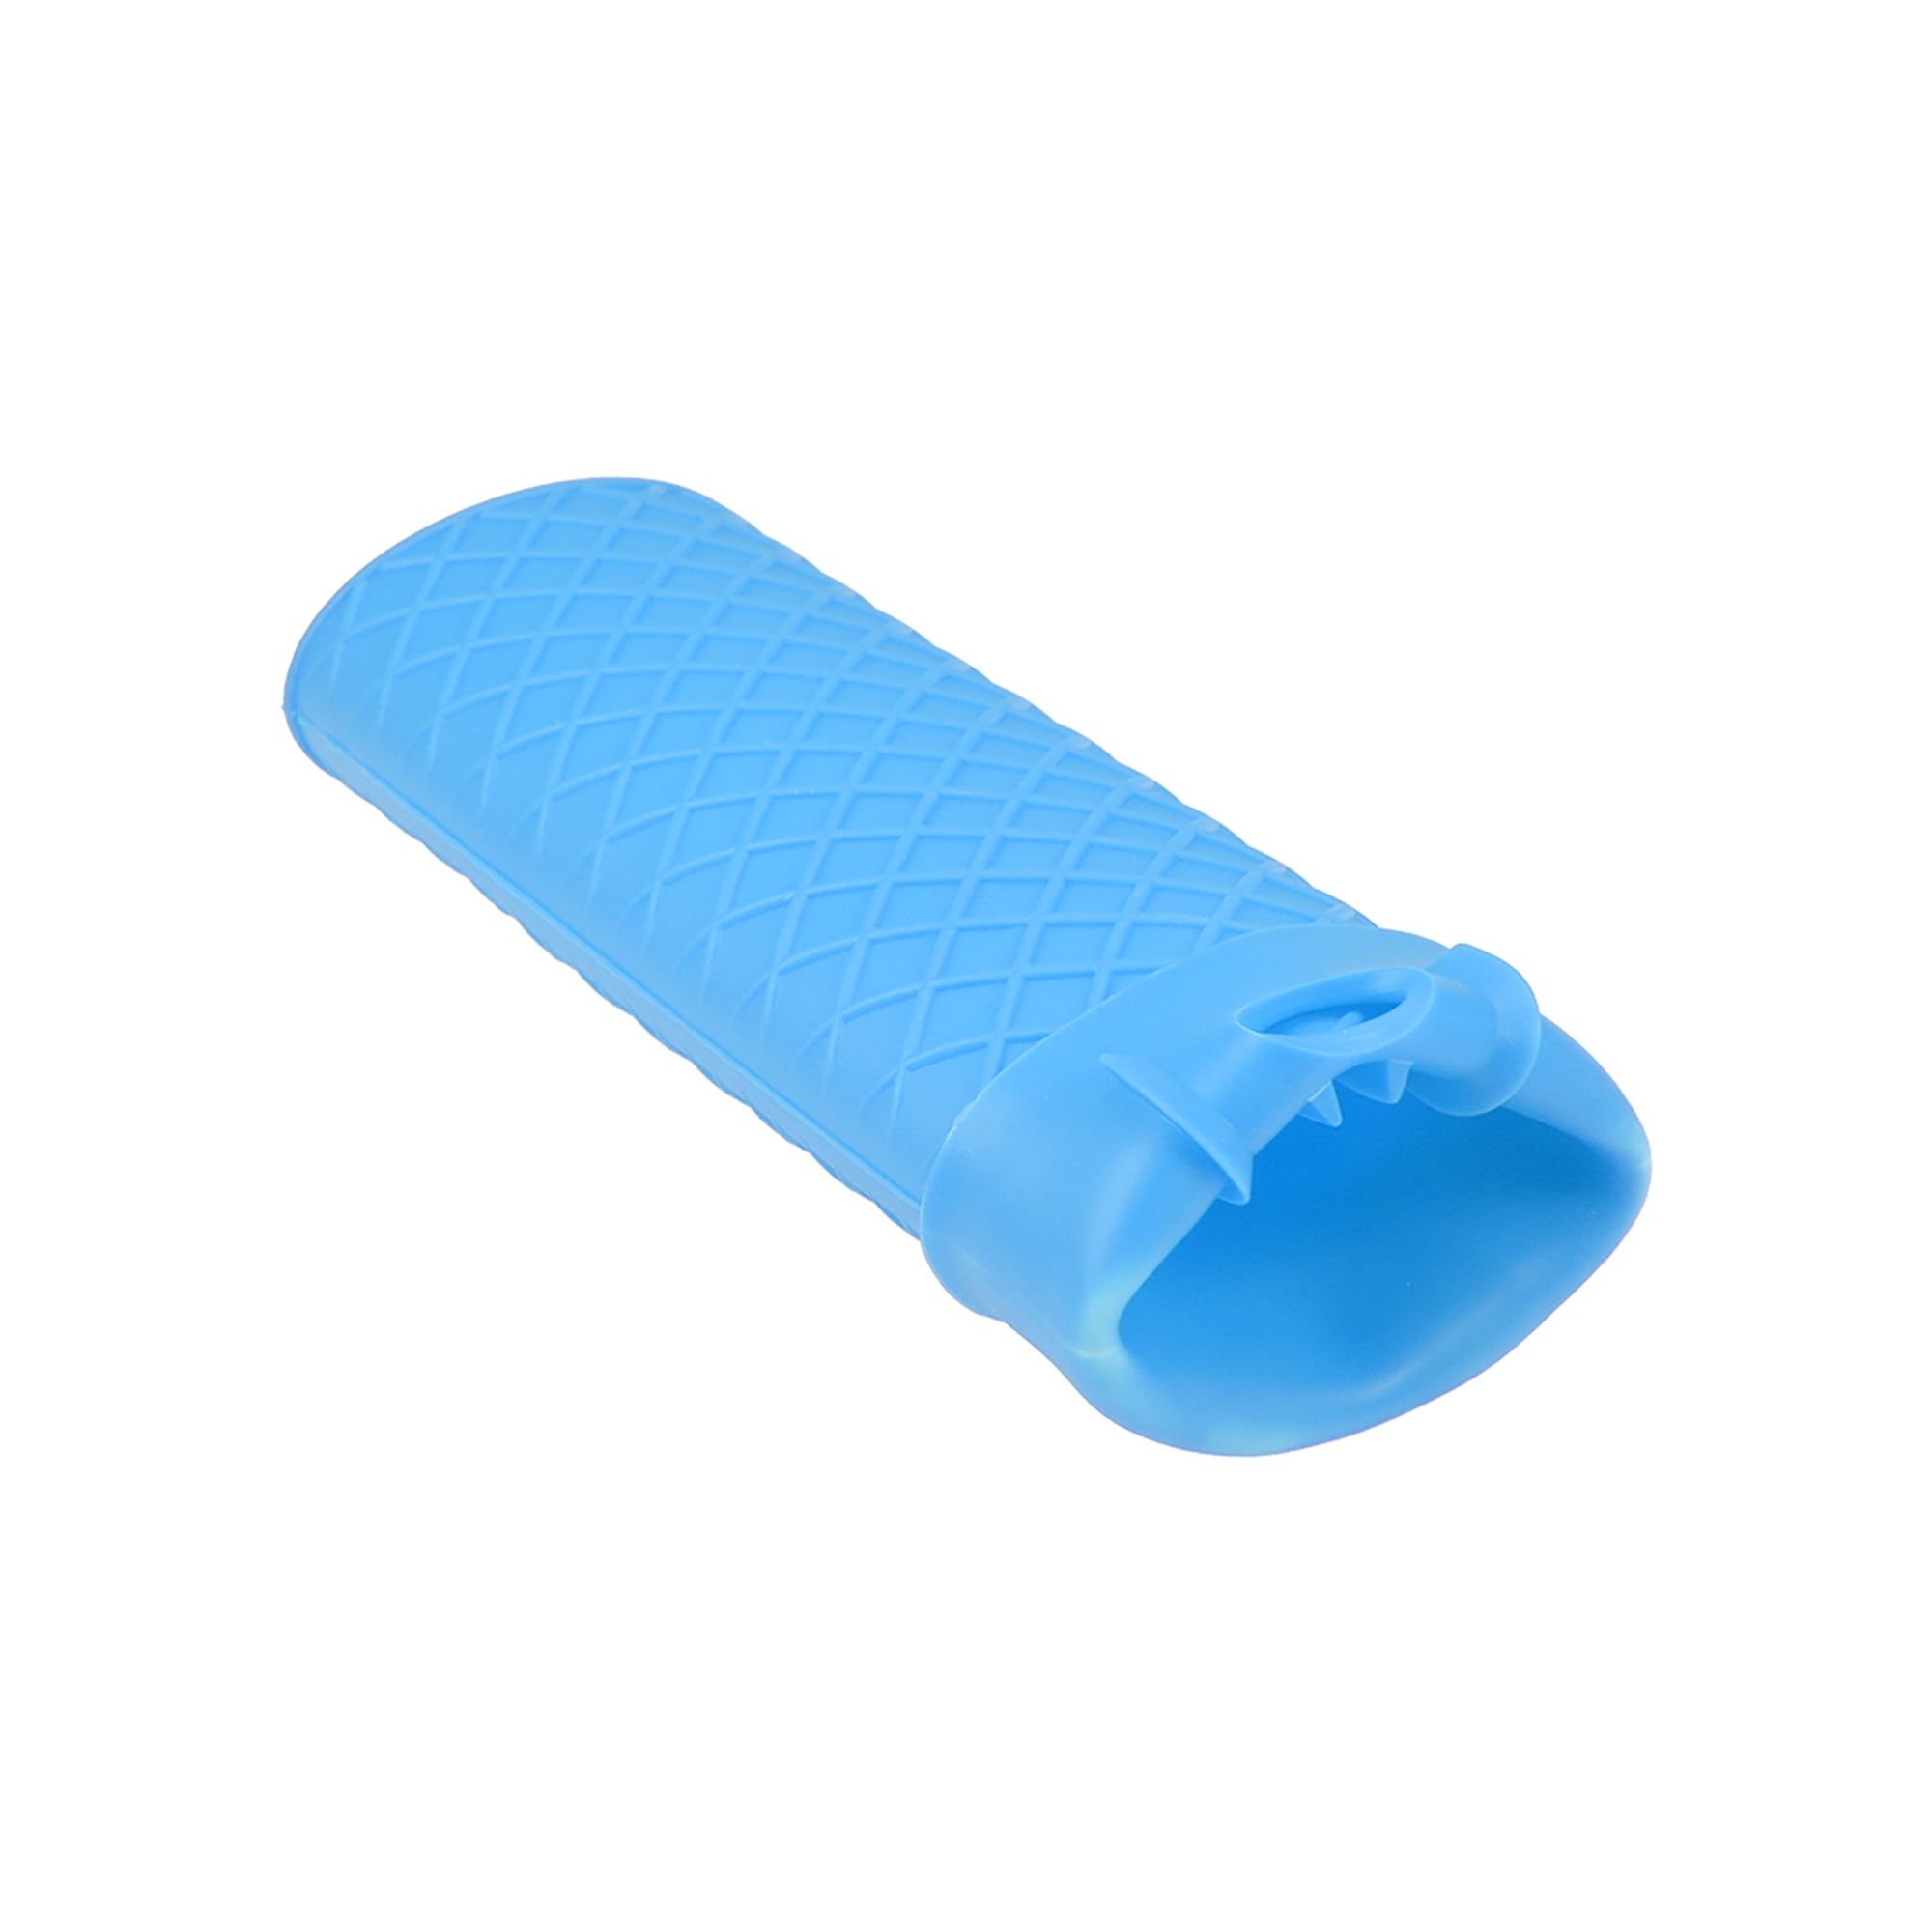 LE CREUSET COOL Tool Silicone Handle Sleeve Blue Hot Pot Grip Protector  $17.18 - PicClick